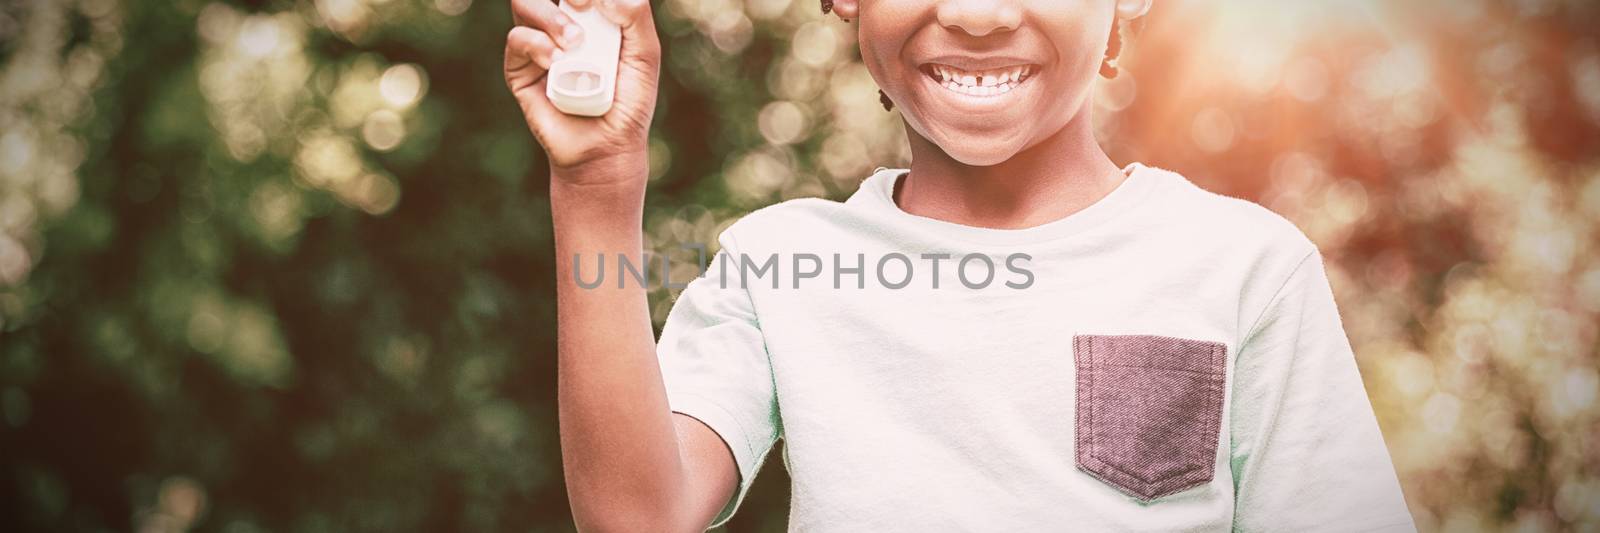 Boy showing his asthma inhaler in the park